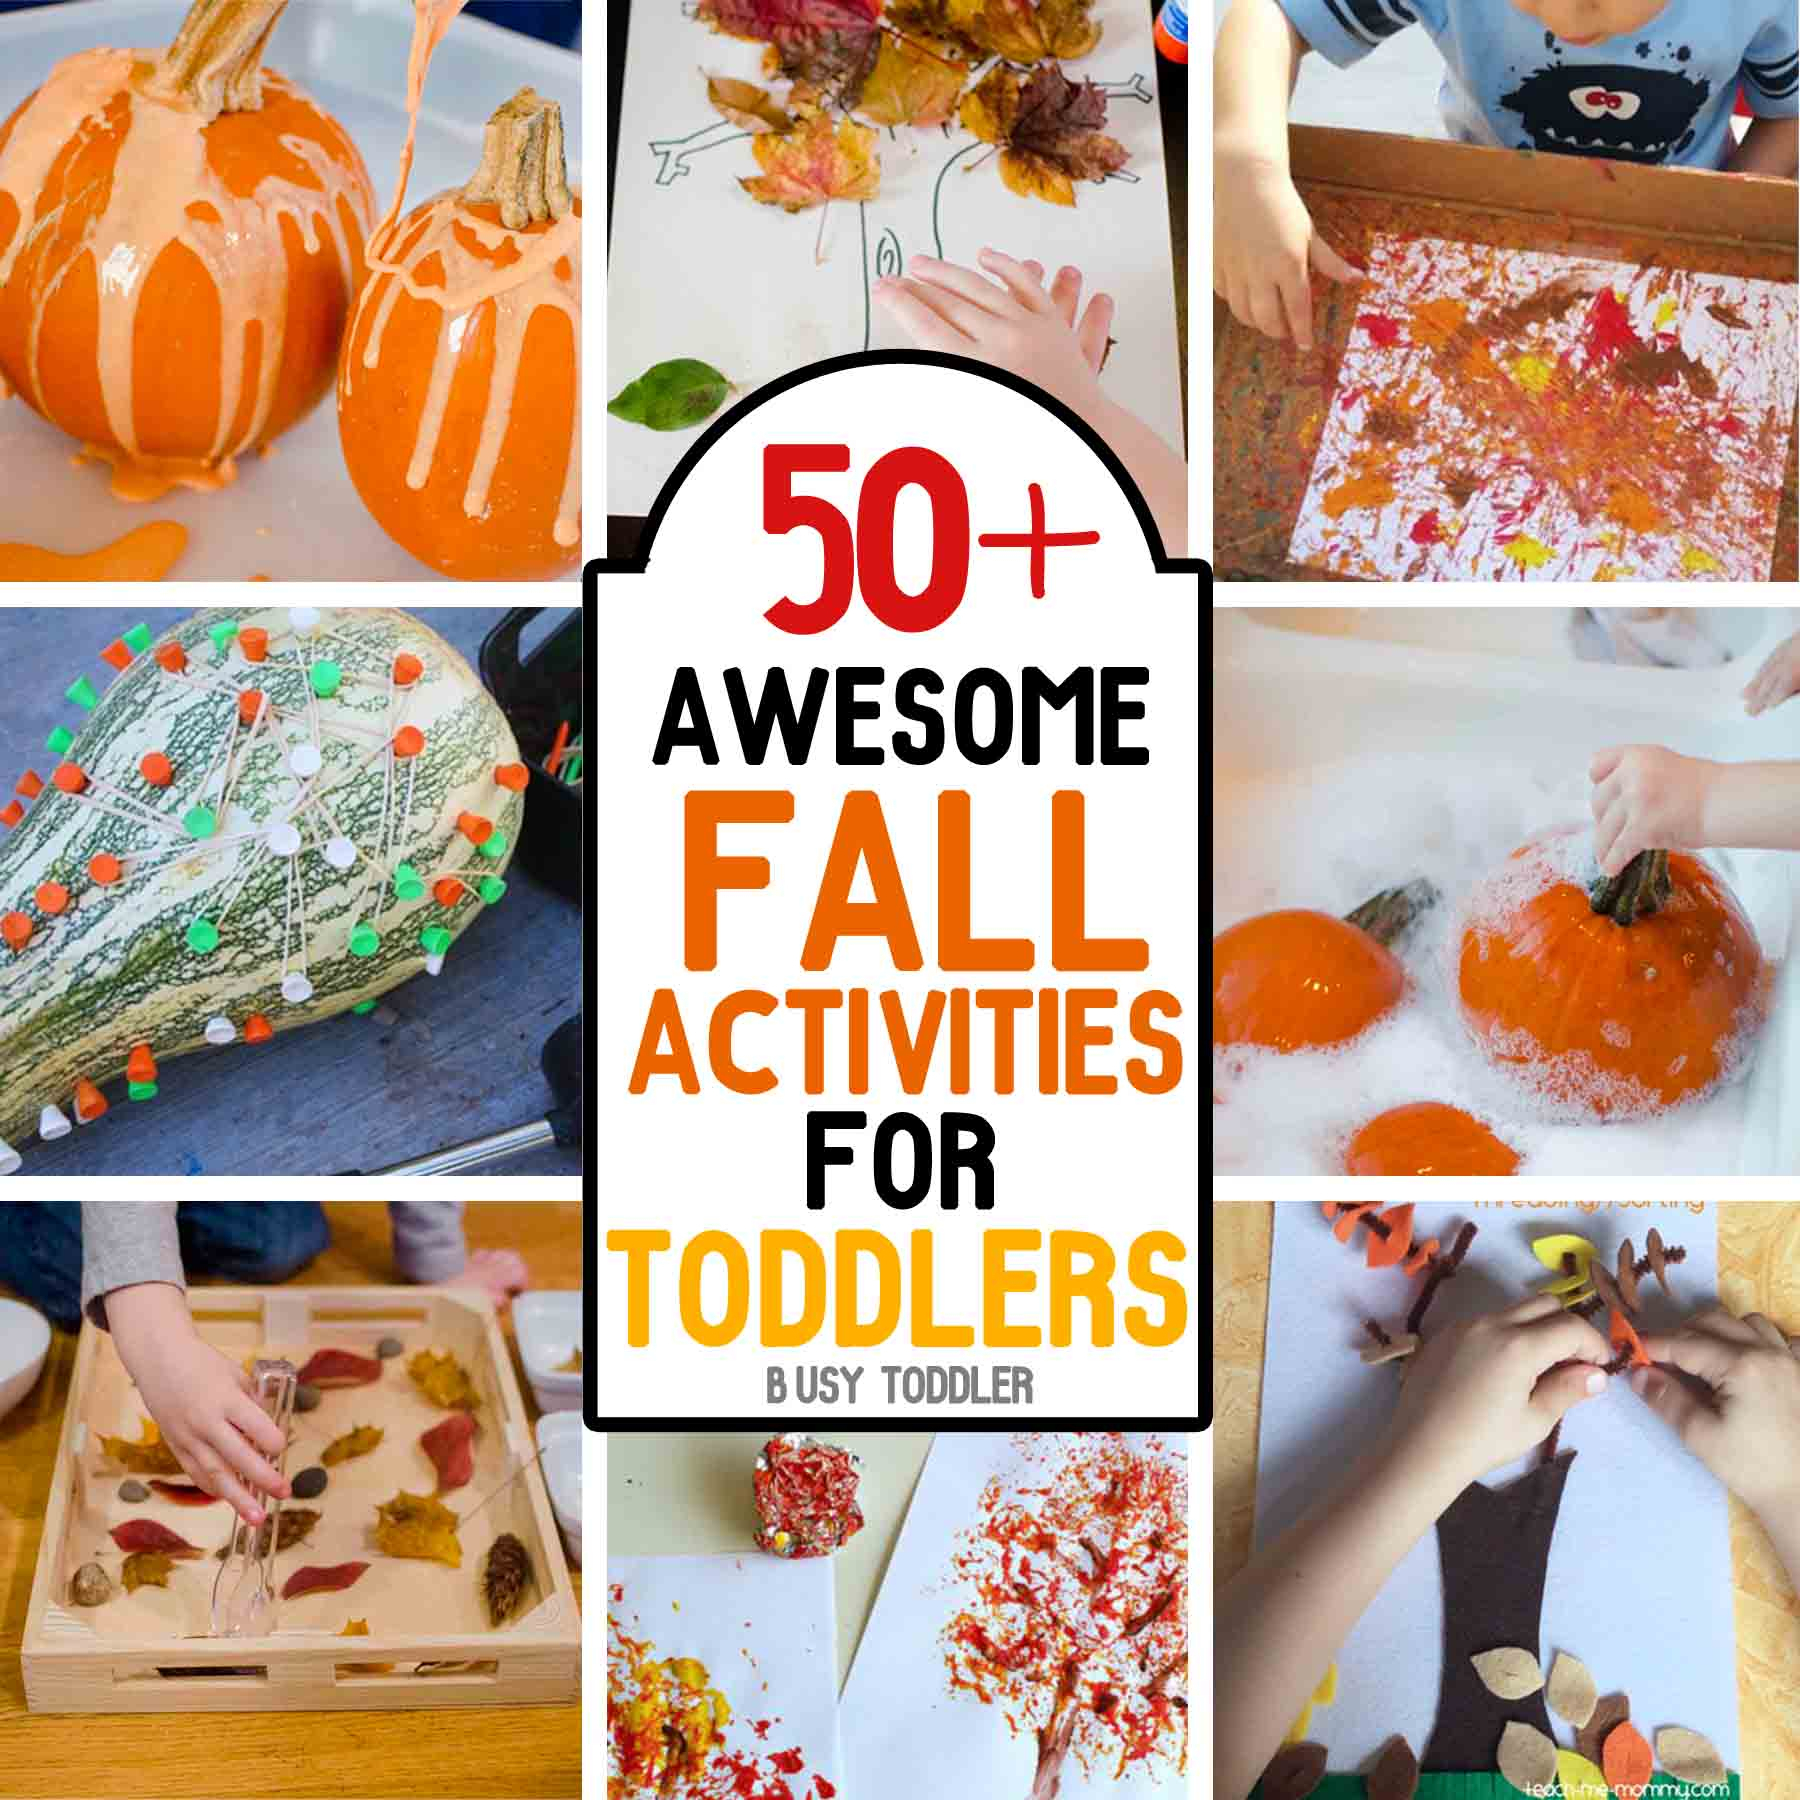 50+ Awesome Fall Activities For Toddlers - Busy Toddler